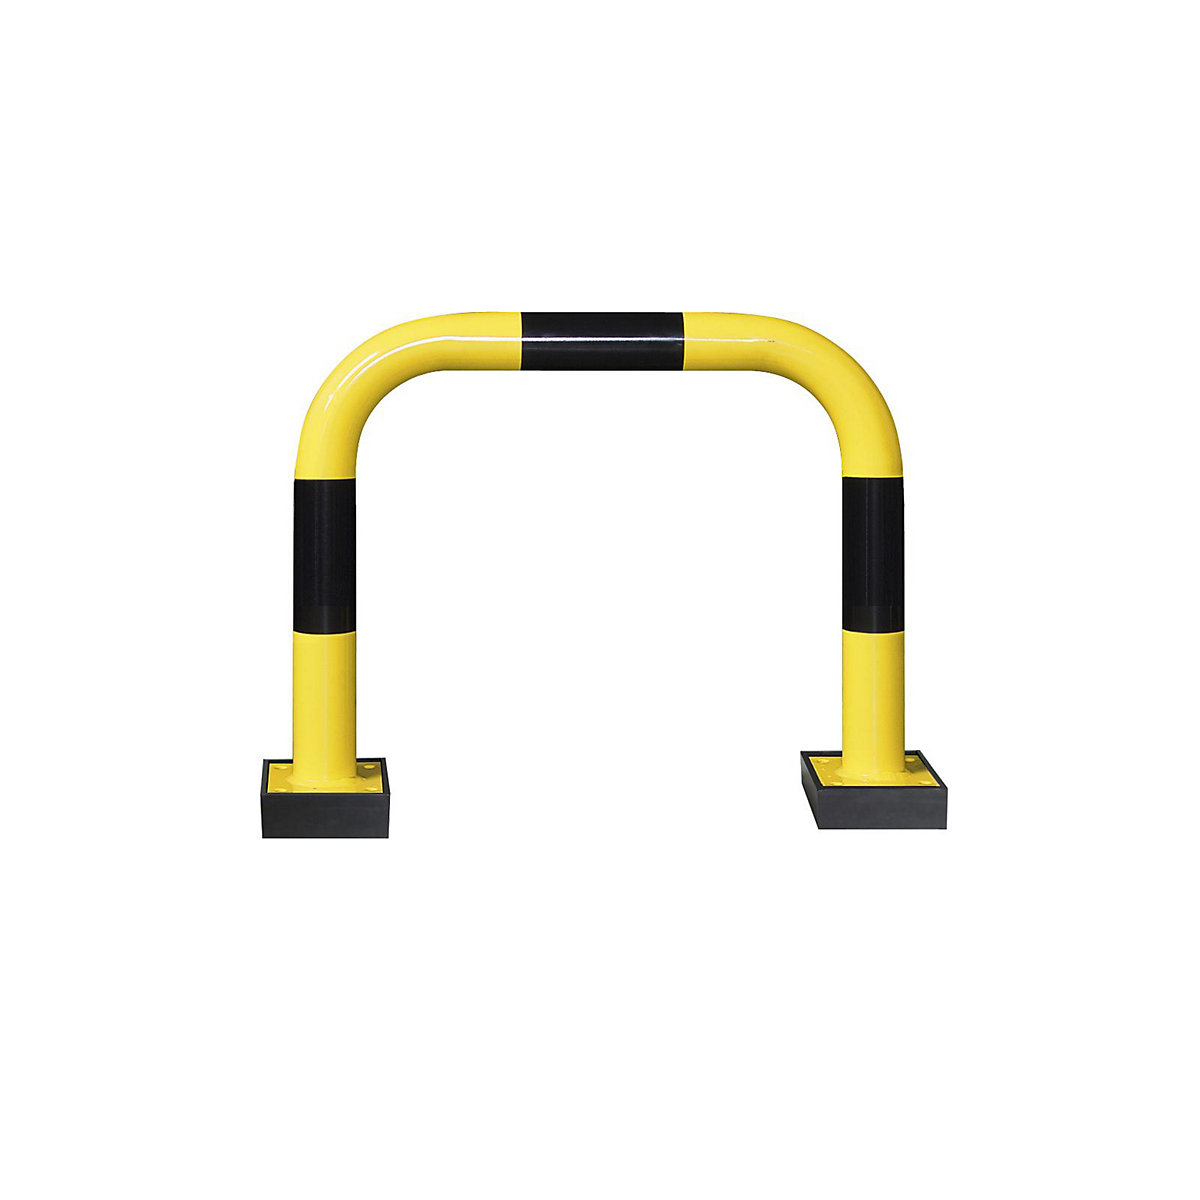 Crash protection bar, flexible, for outdoor use, HxW 640 x 750 mm